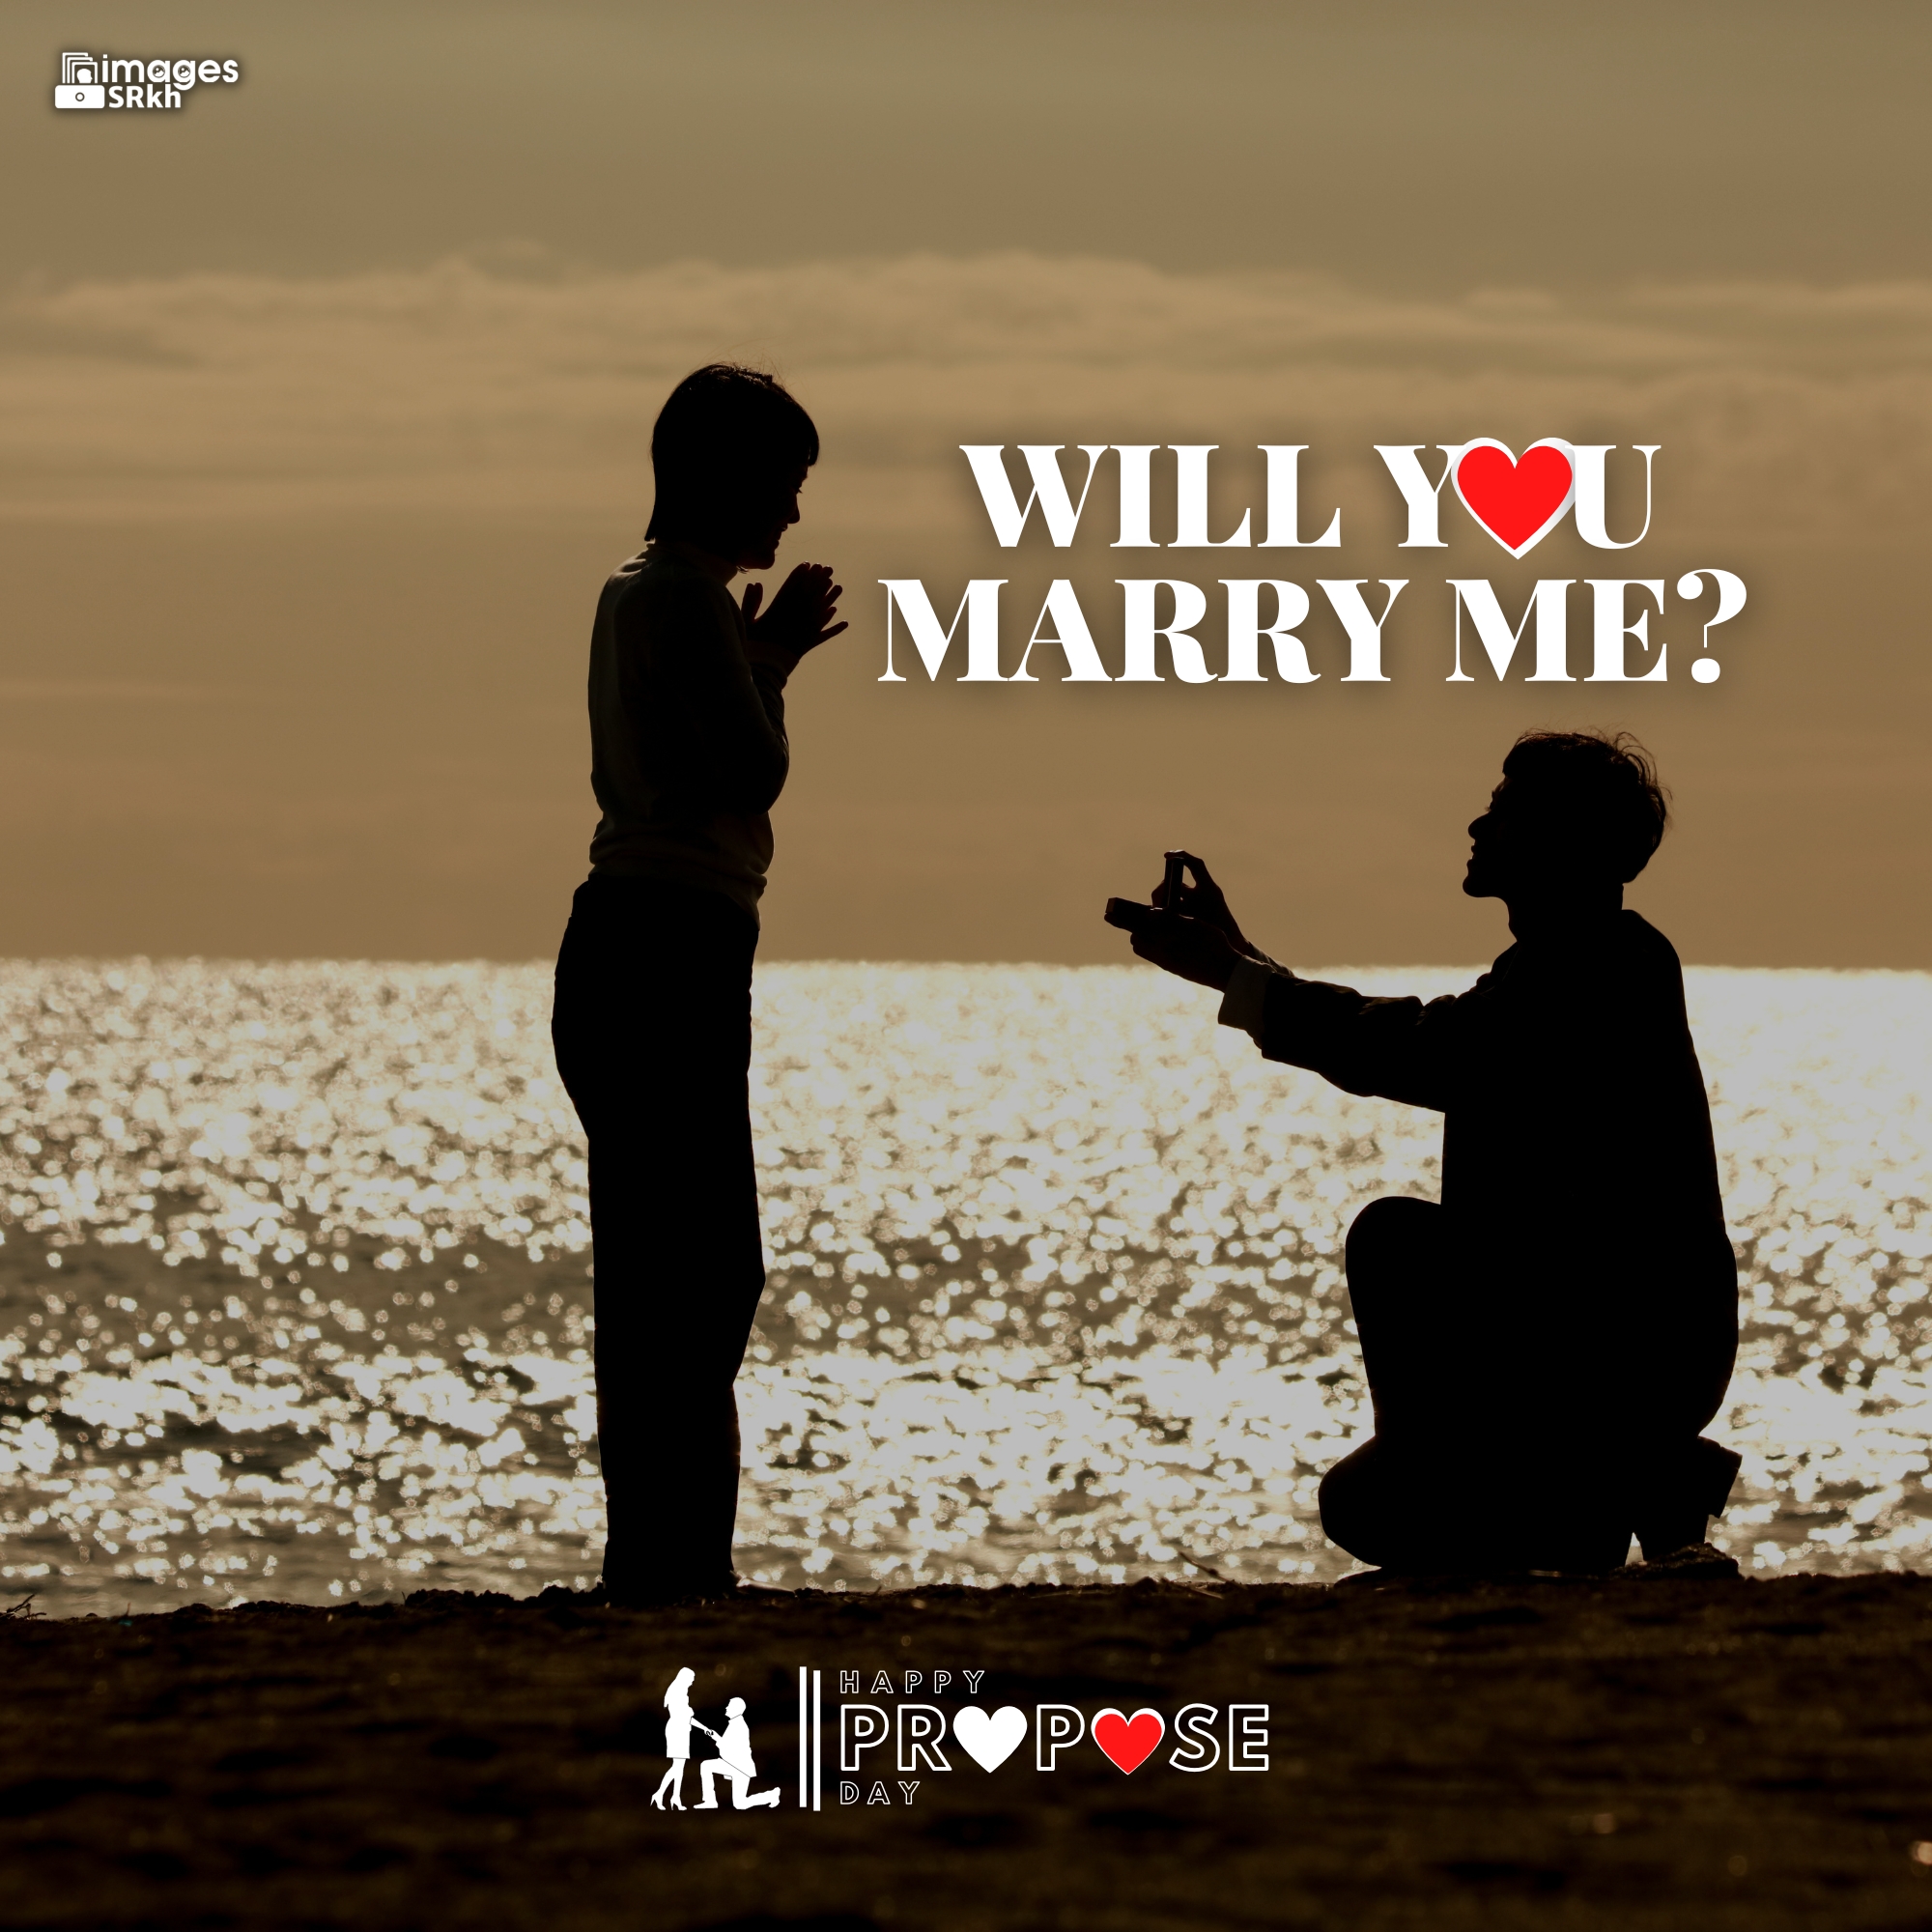 Propose Day Images | 286 | Will You MARRY ME